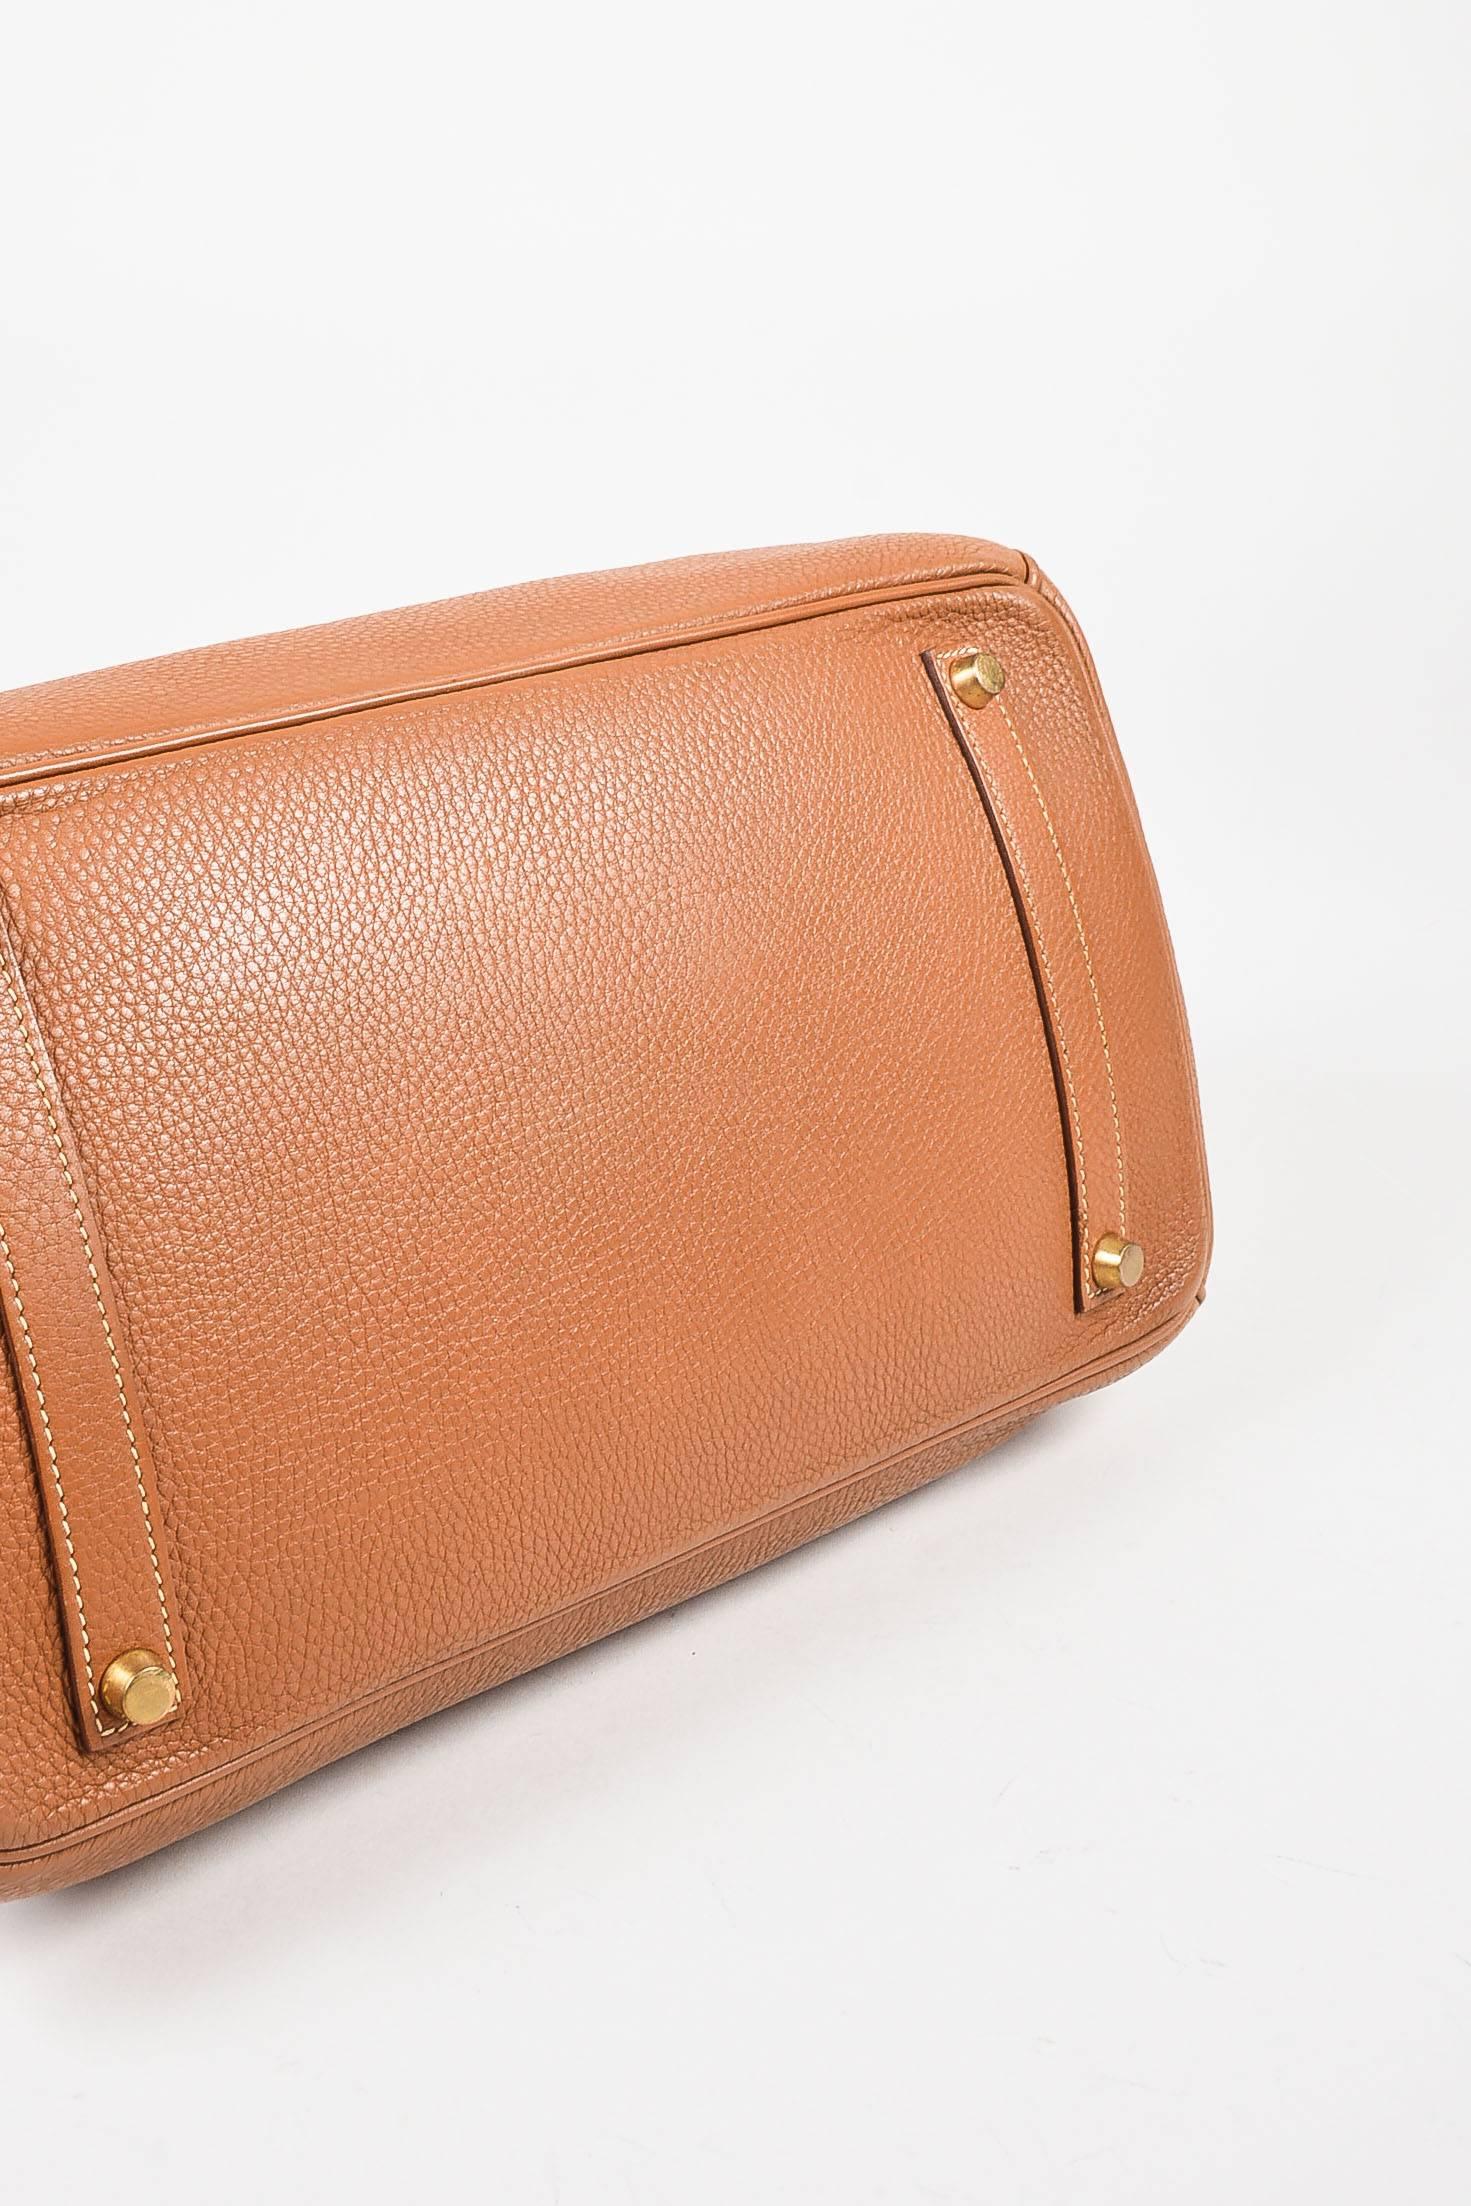 Orange Hermes Gold Brown Clemence Leather Top Handle 